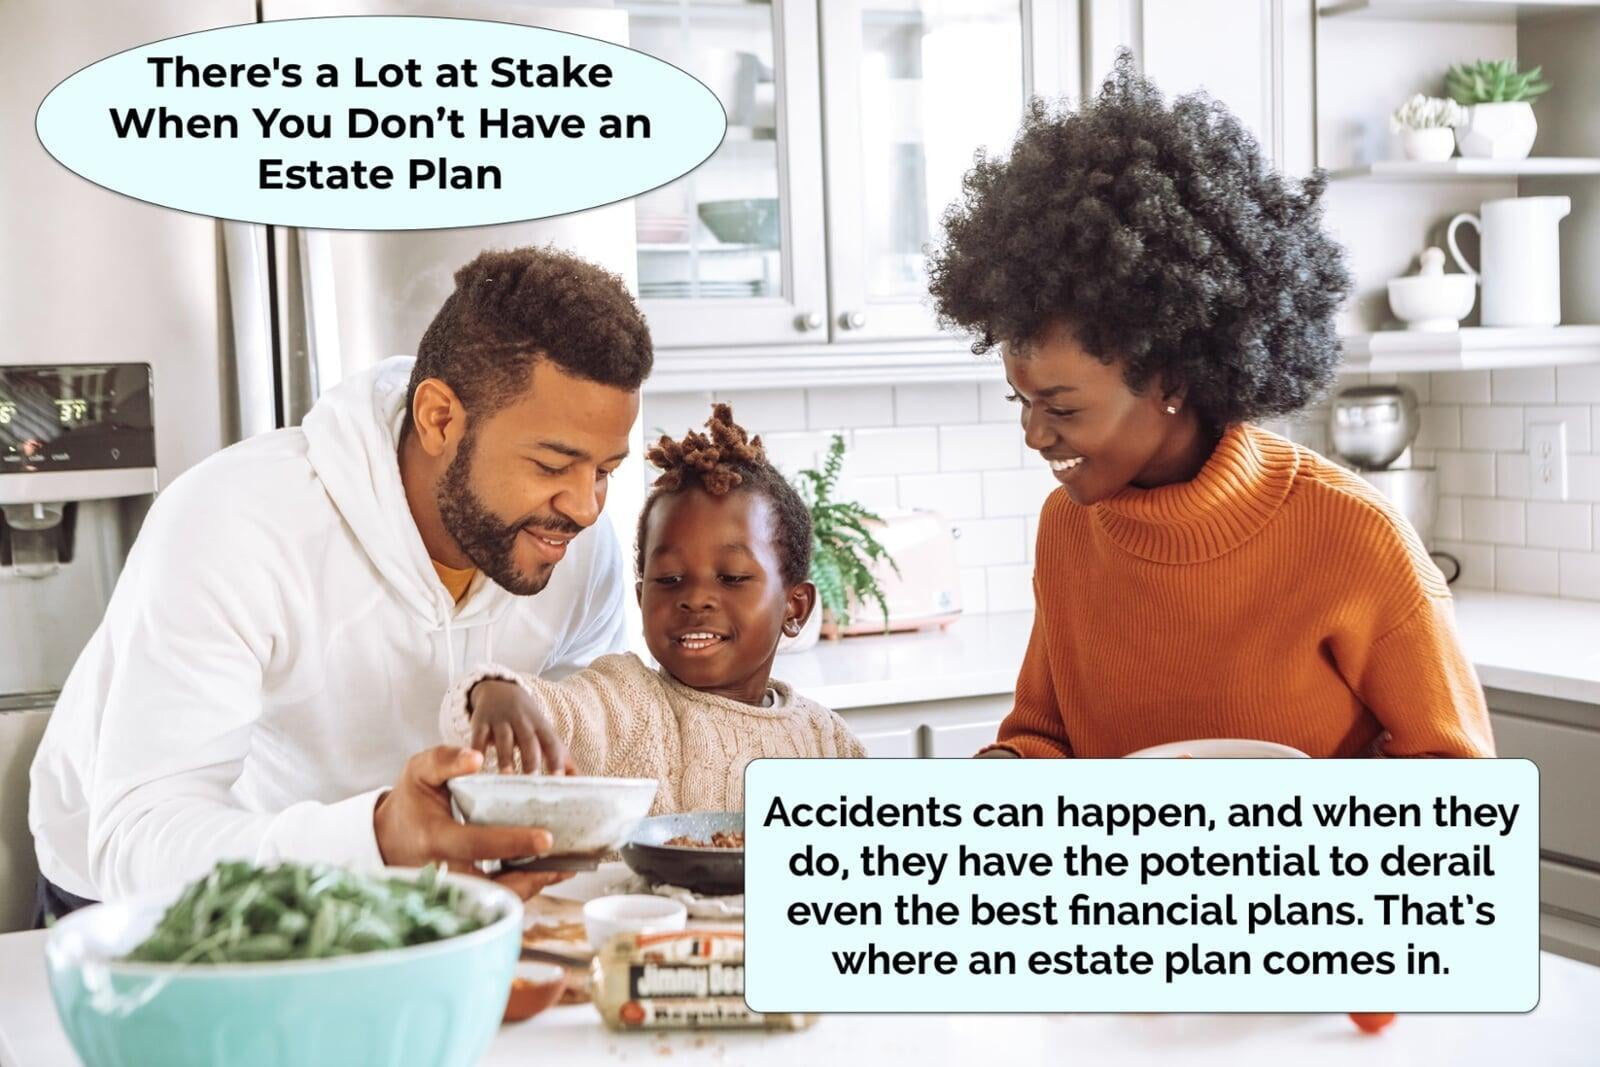 There's a Lot at Stake When You Don't Have an Estate Plan